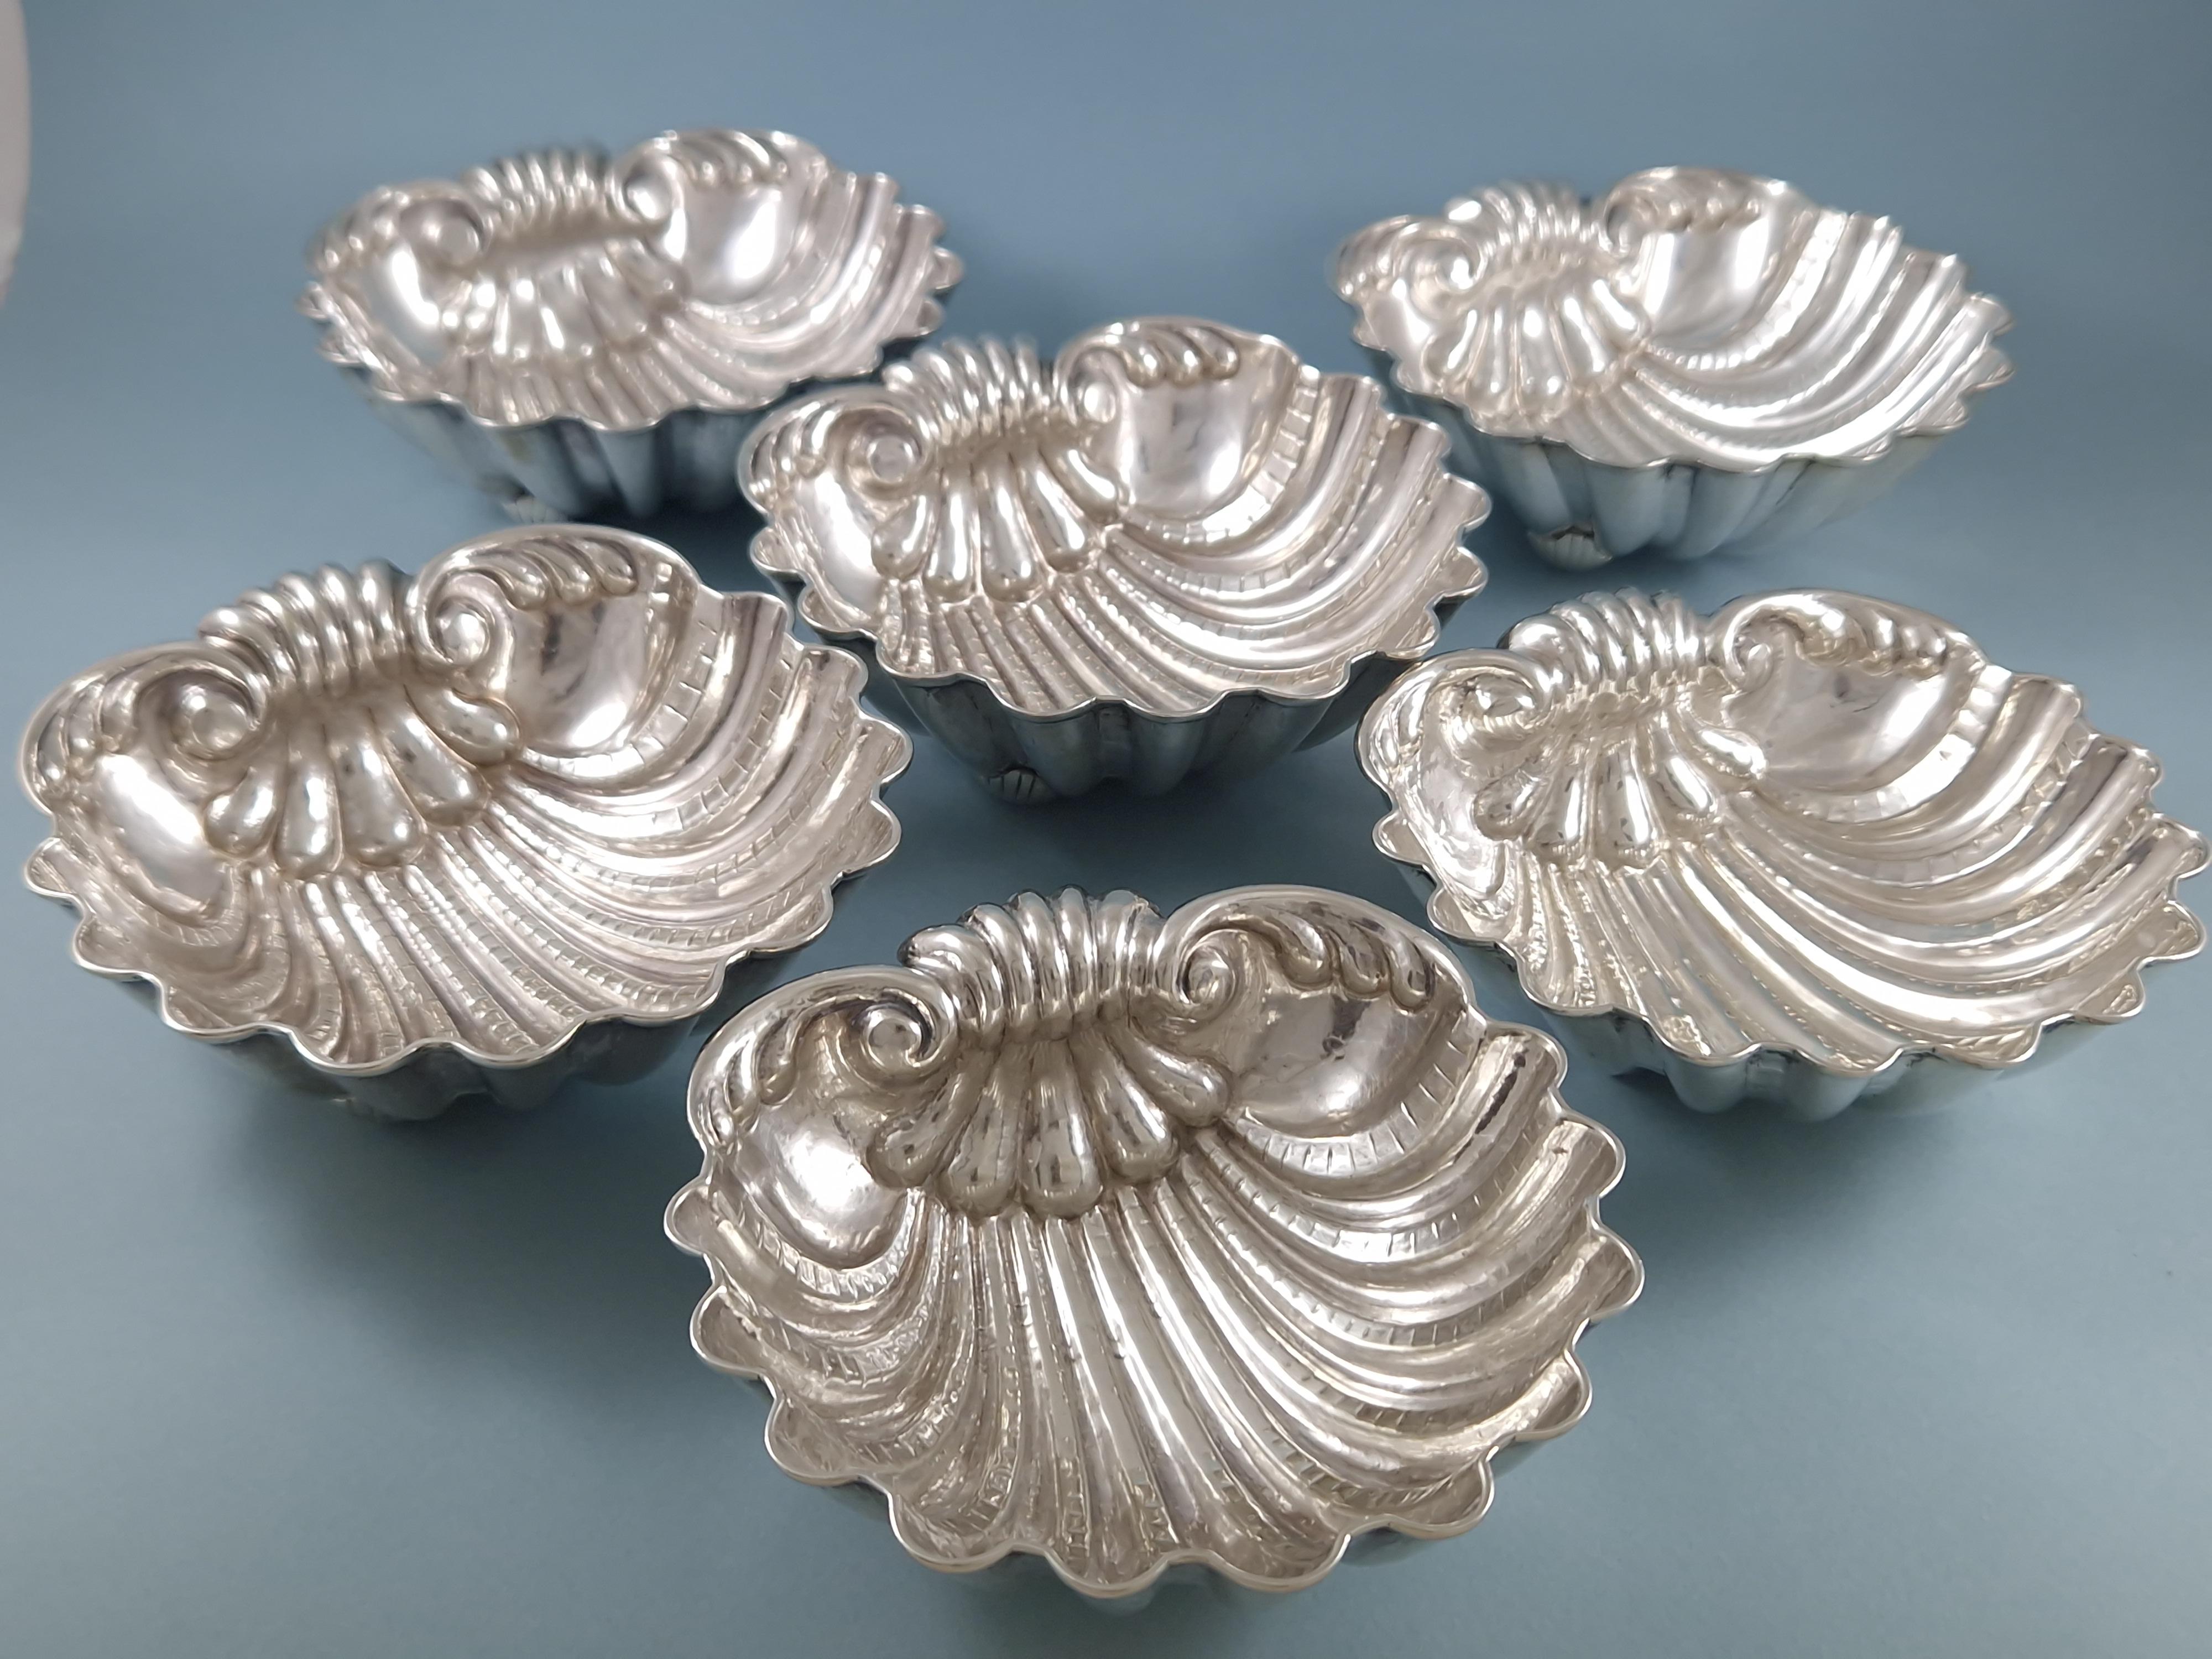 Nice set of 6 shell-shaped solid silver bowls 

Silver hallmark 800 

Some variations of size 
Length: 13.2 cm 
Width: 13 cm 
Height: 4.6 cm
Weight: 845 grams

In excellent condition